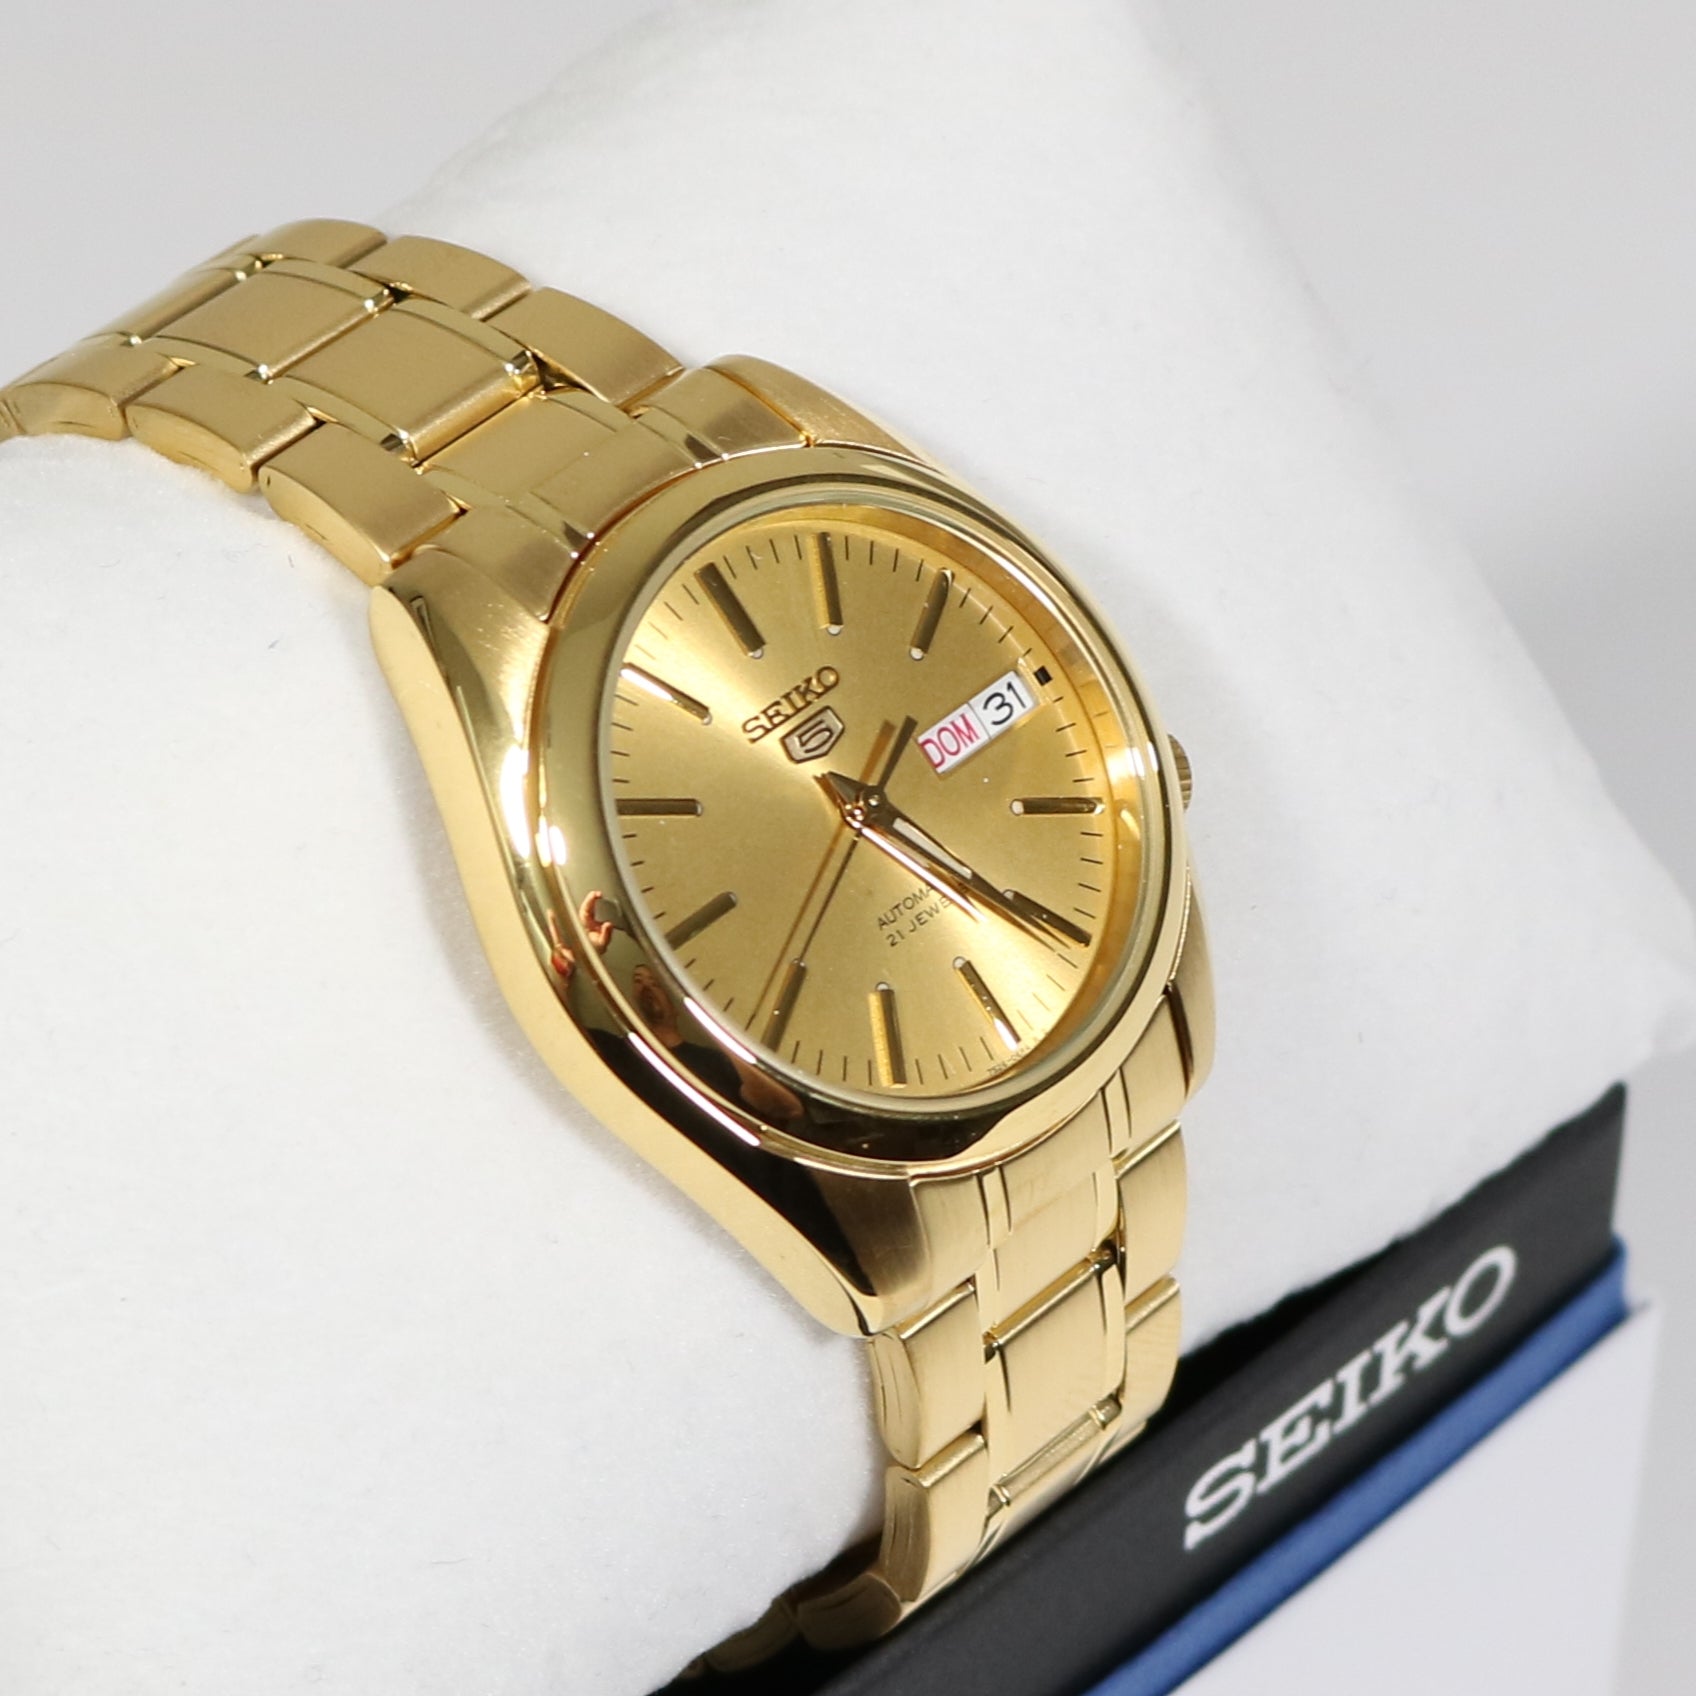 Seiko Automatic See-thru Back Gold Tone Mens Watch SNKL48K1, SNKL48 ...